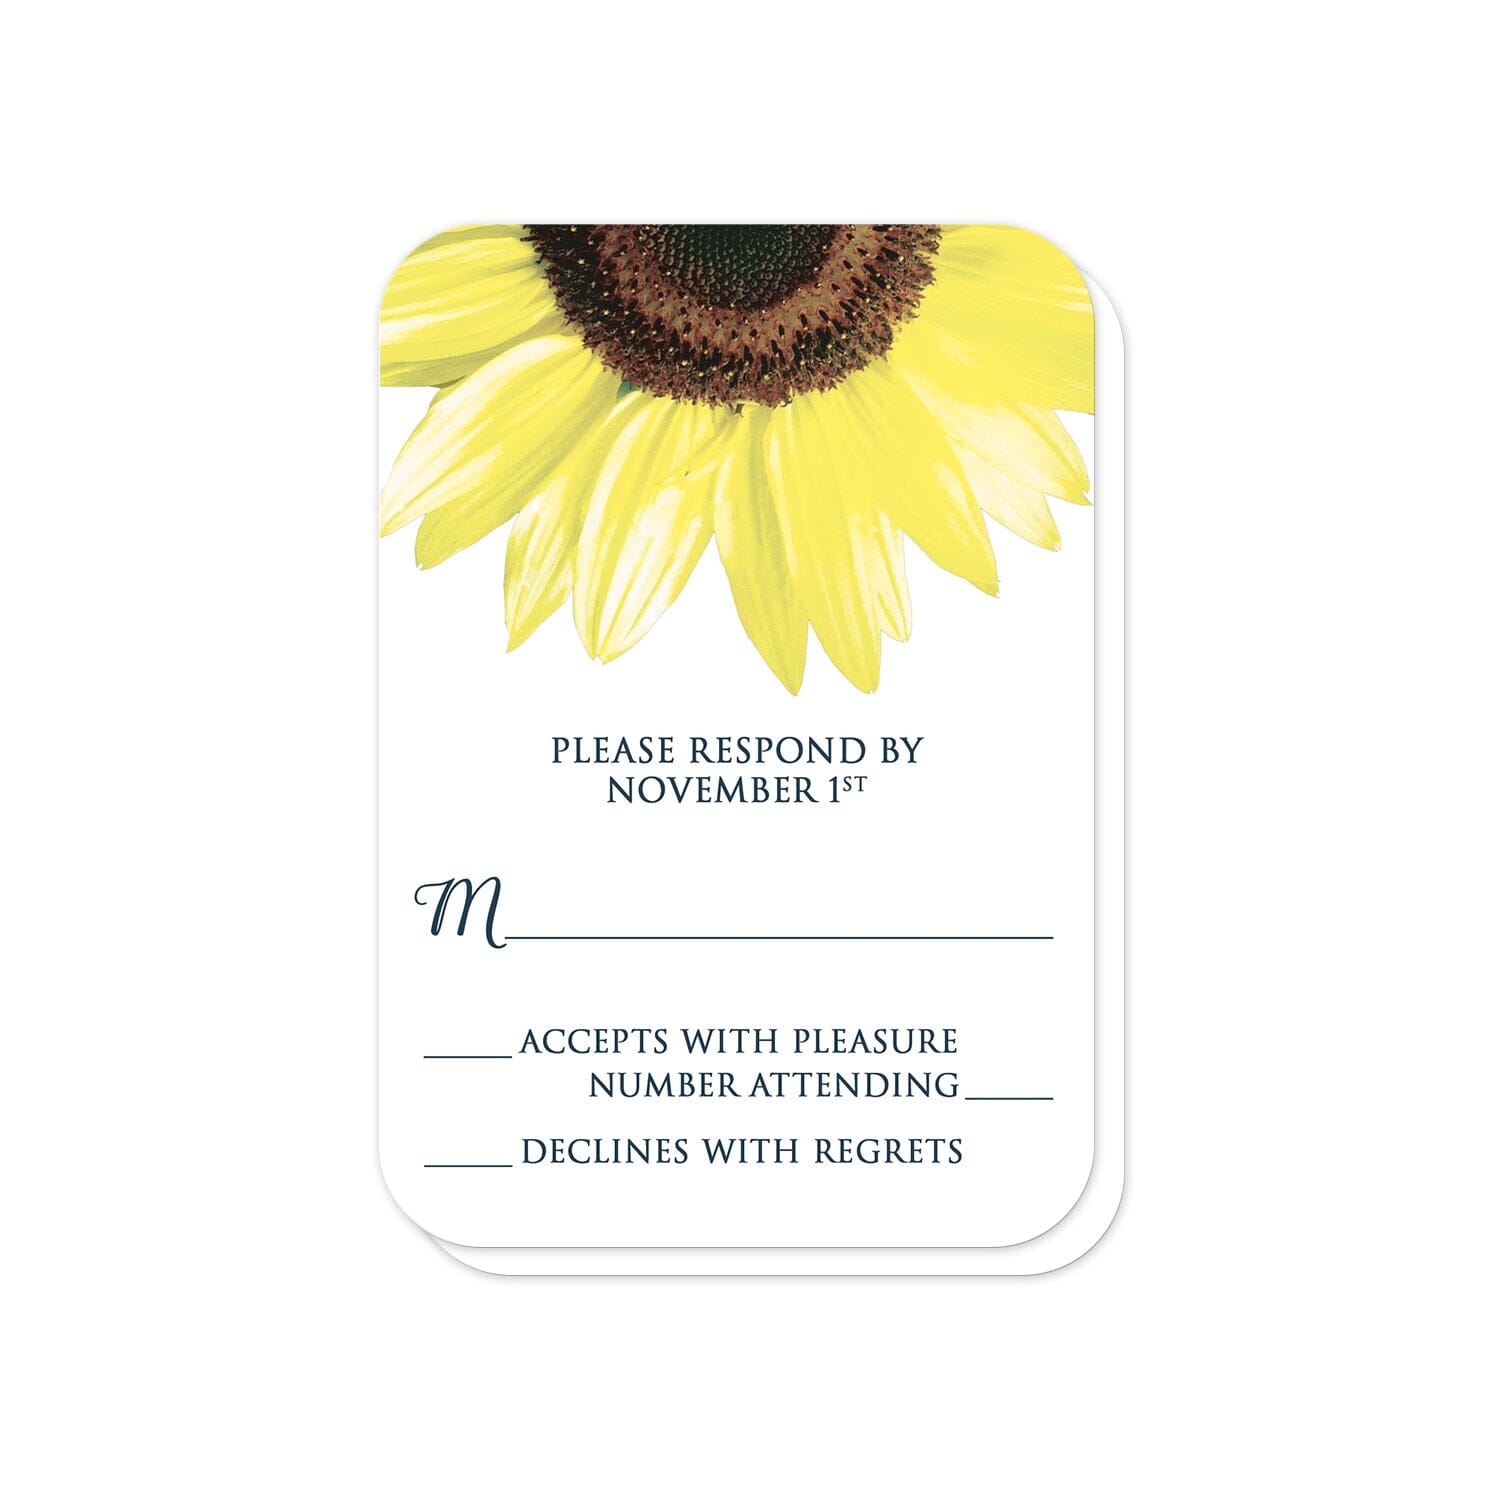 Rustic Sunflower and Denim RSVP Cards (with rounded corners) at Artistically Invited.